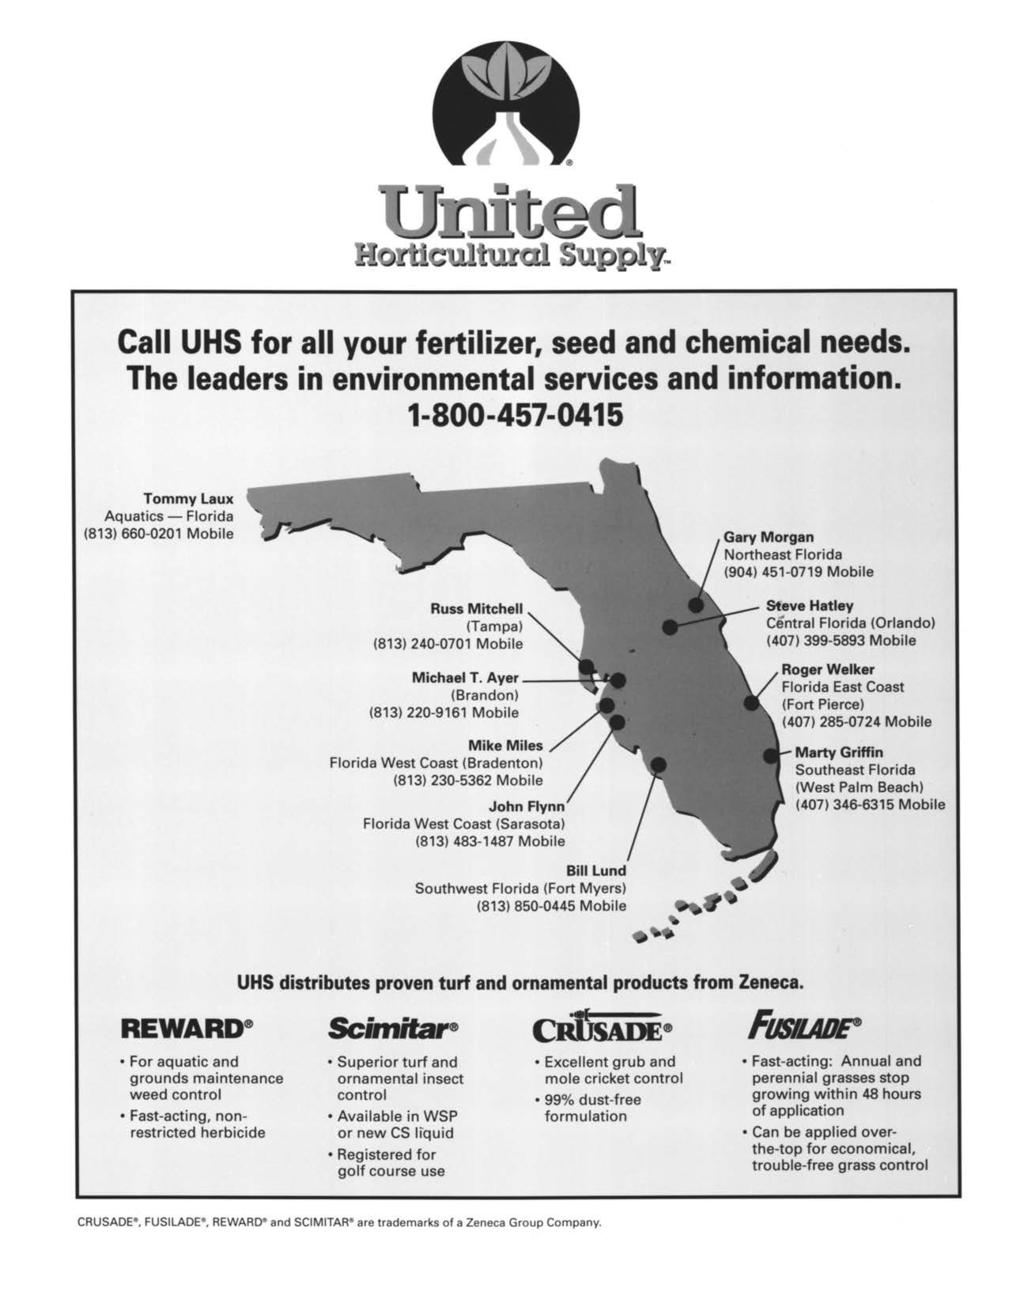 United Horticultural Supply. Call UHS for all your fertilizer, seed and chemical needs. The leaders in environmental services and information.